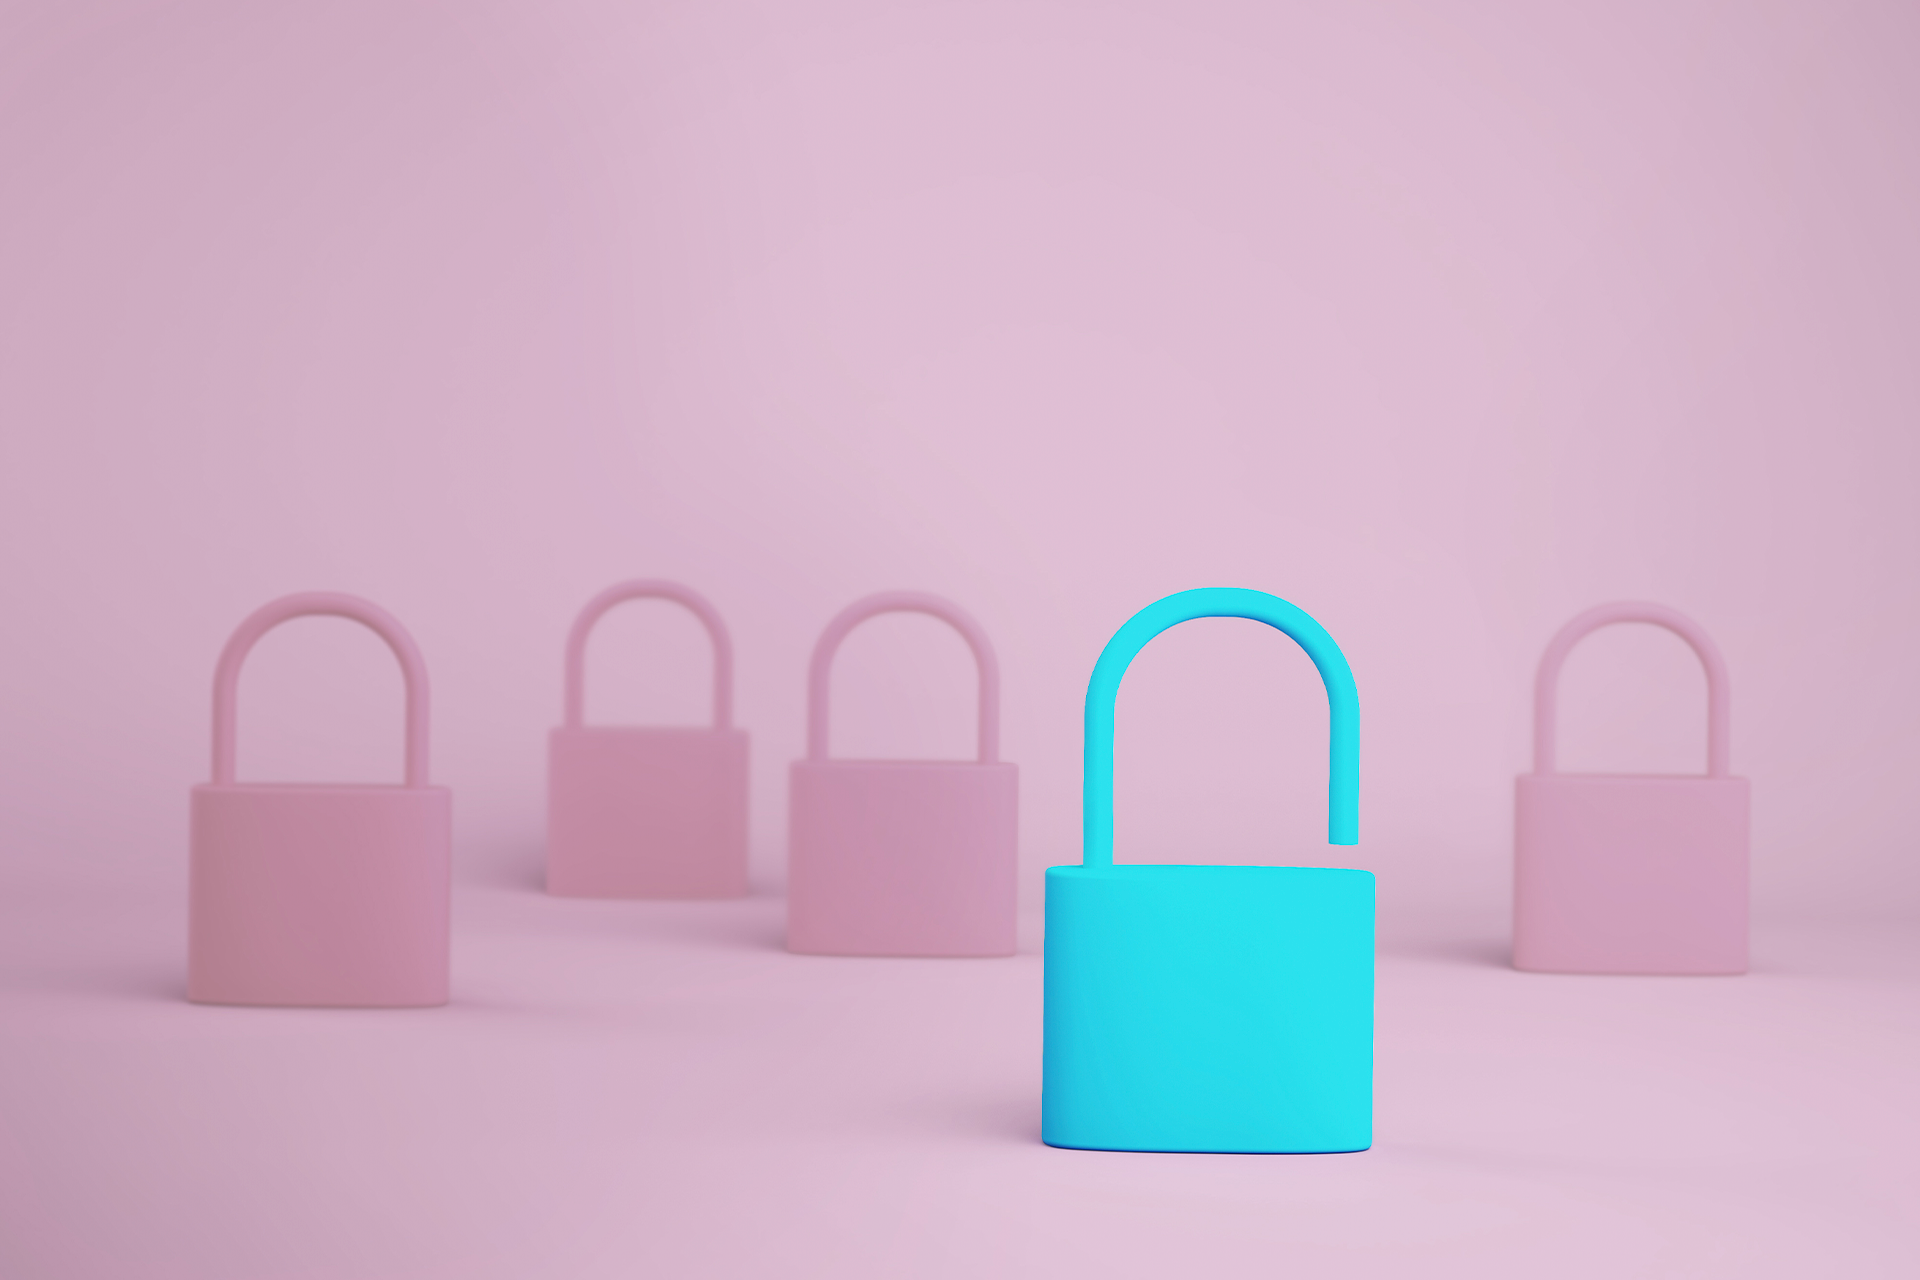 A teal padlock that is unlocked among a bunch of pink padlocks that are closed. 